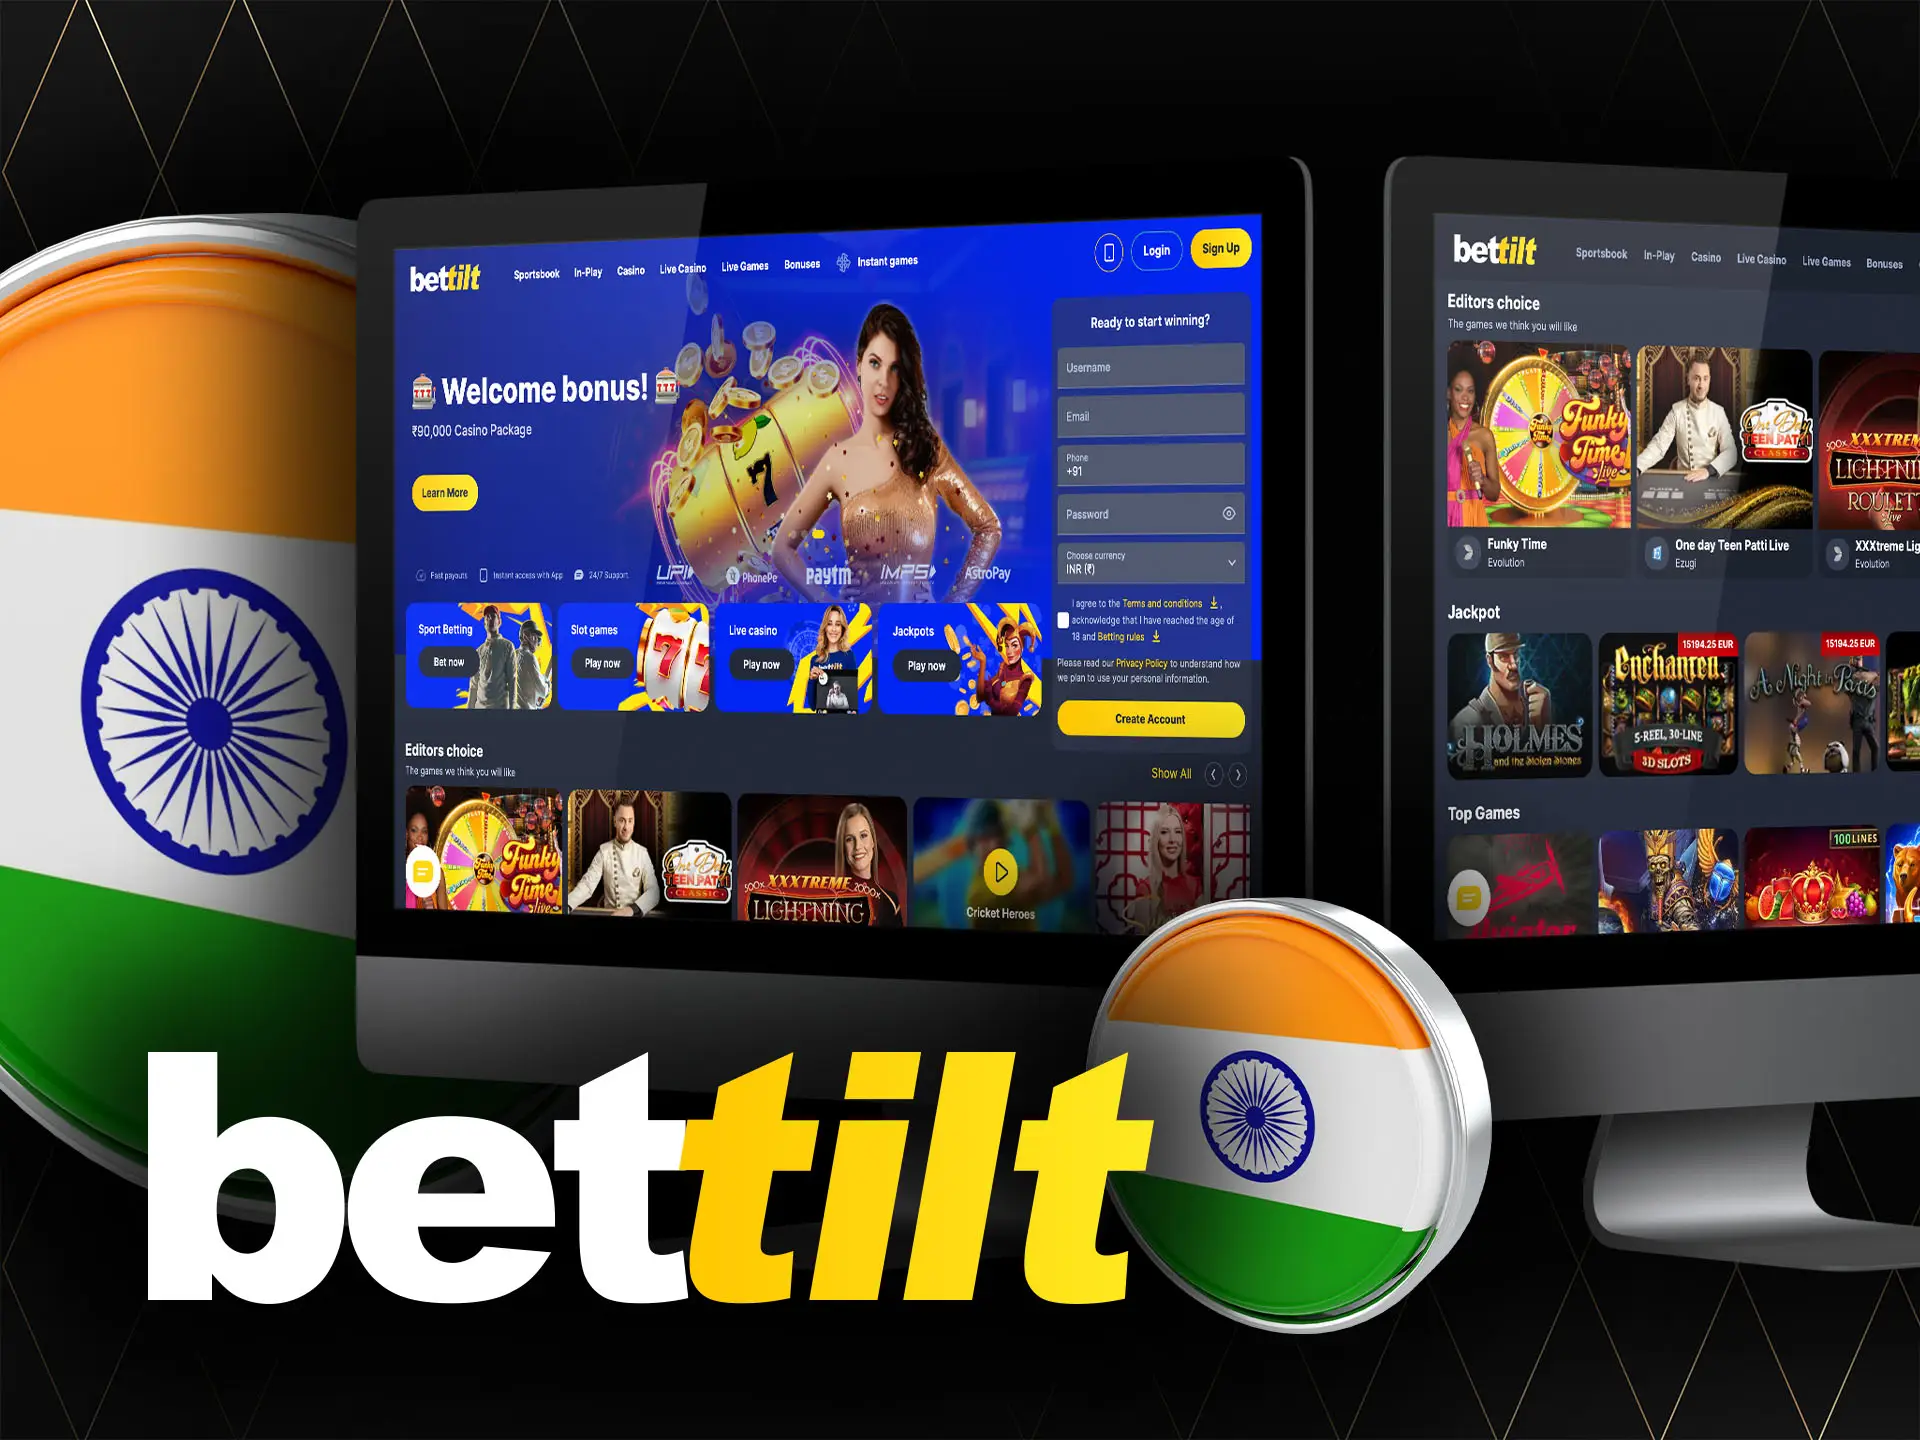 Bettilt is certified by the Curacao Gaming Commission and is legal to bet from India.